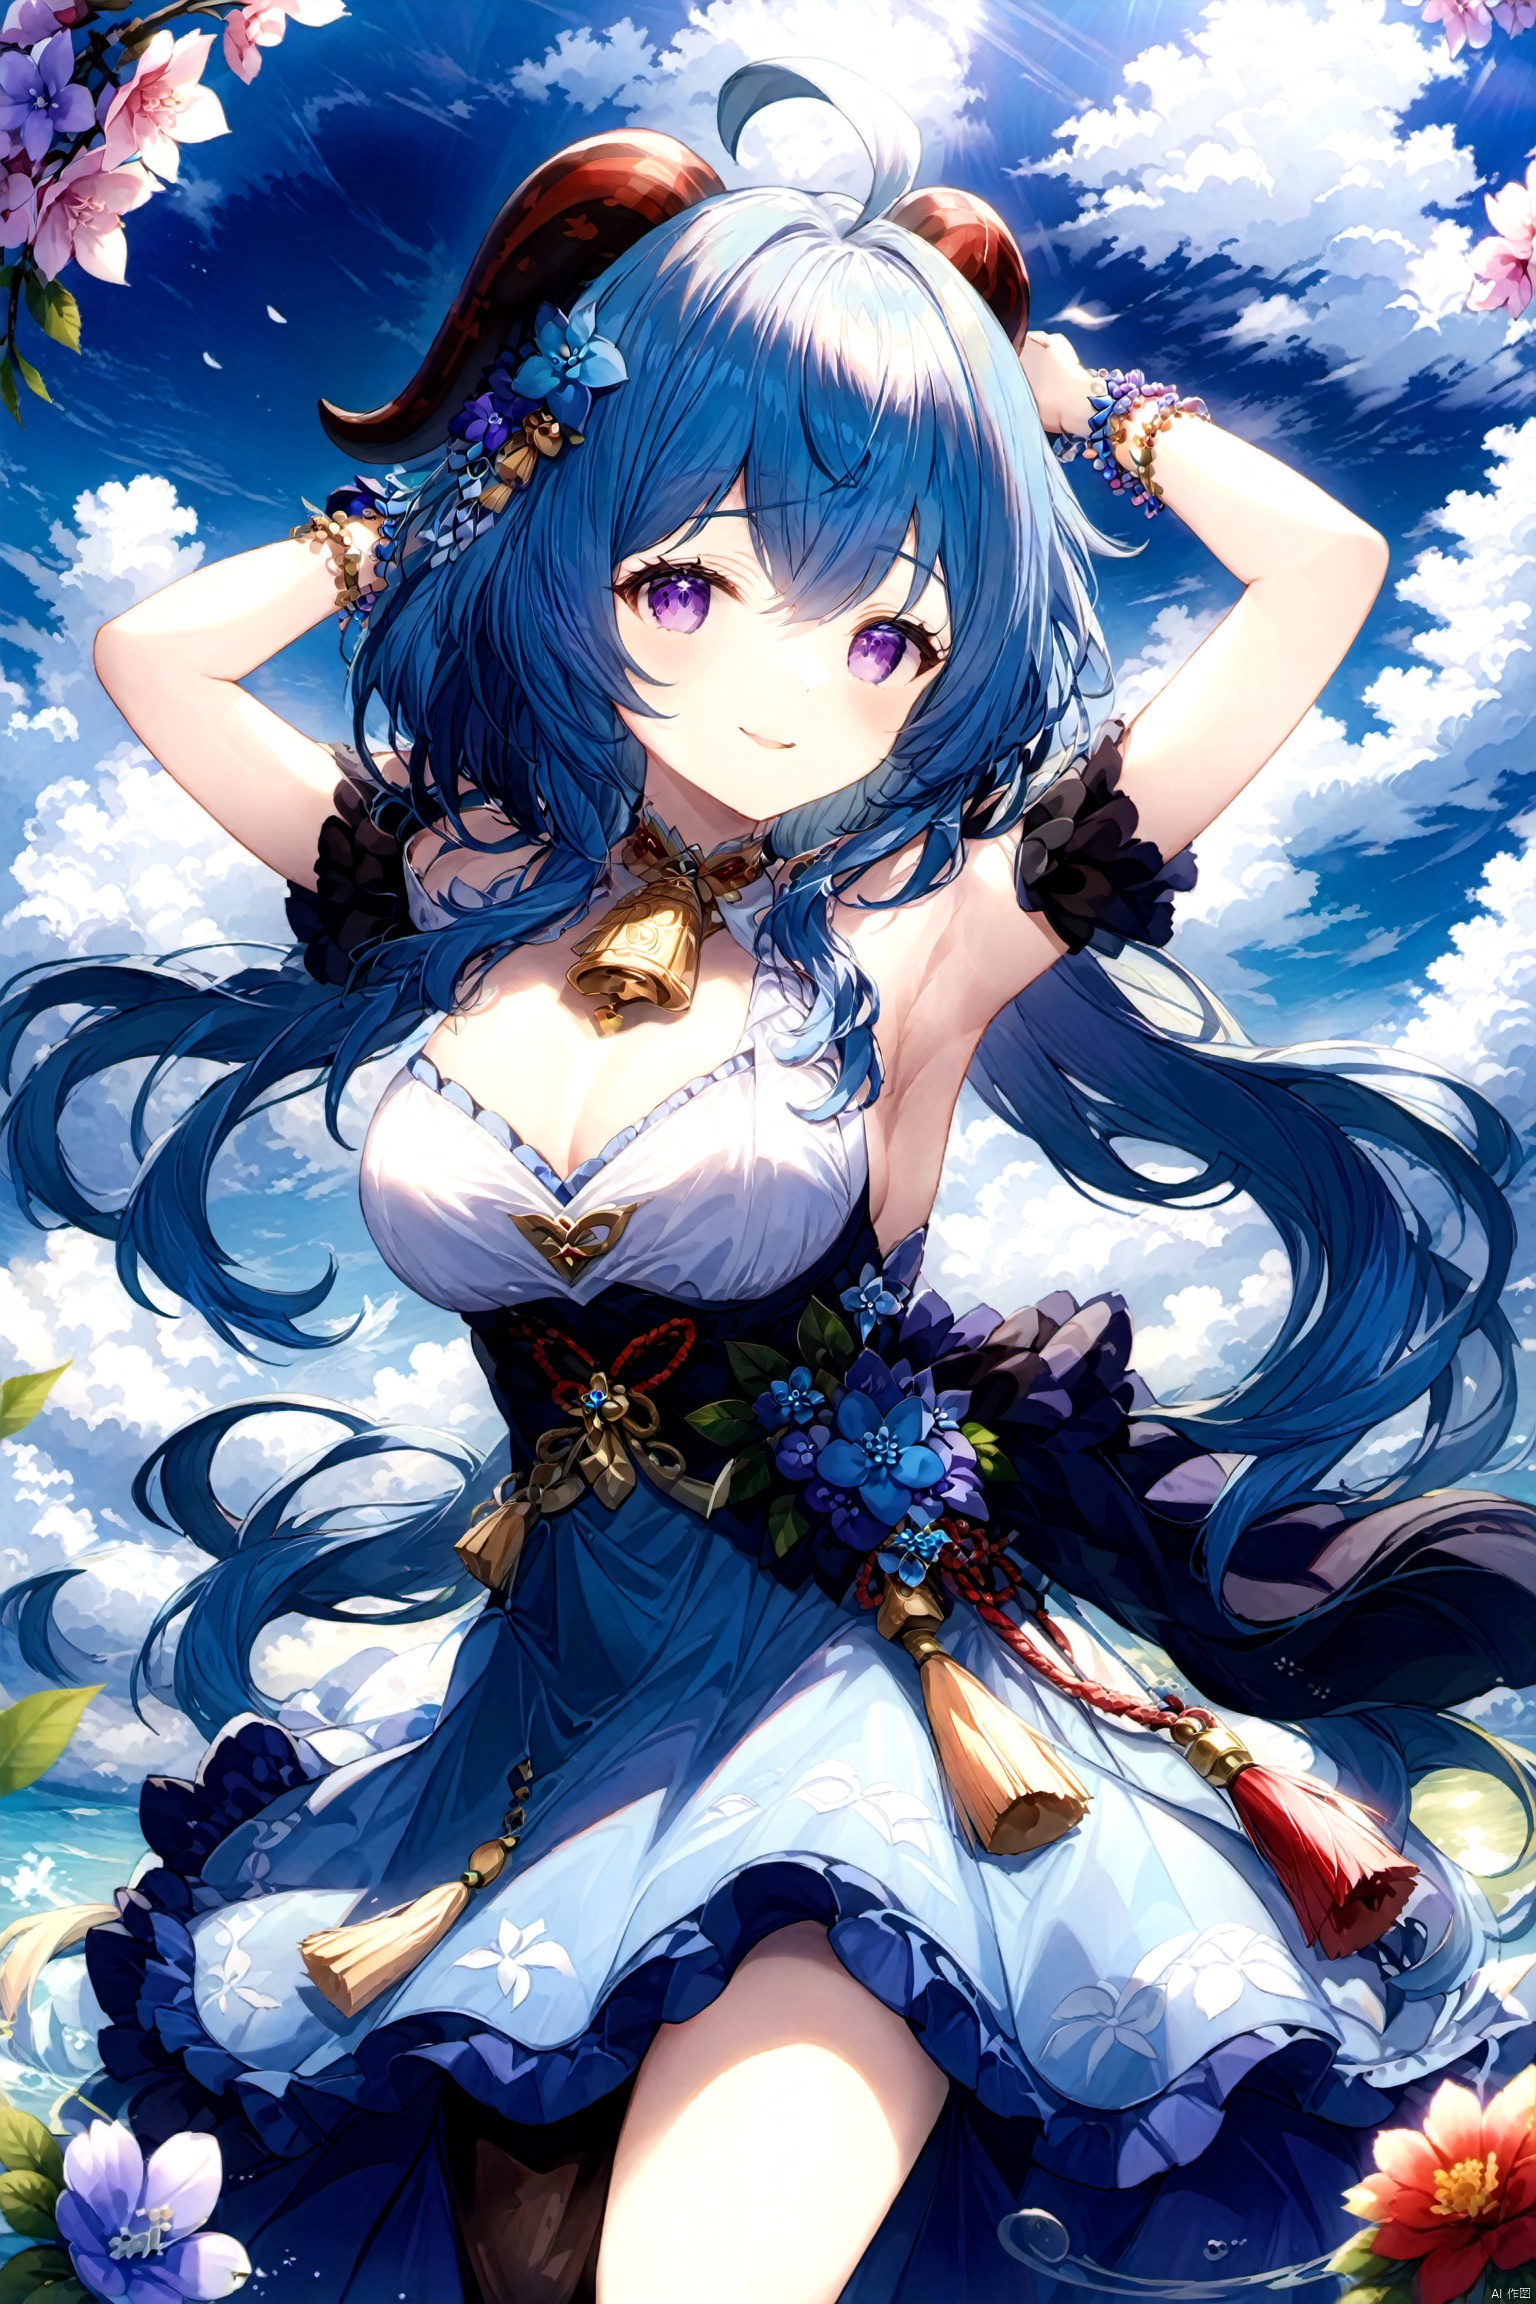  The subject is a single female character with long hair, noticeable breasts, and an engaging gaze towards the viewer. She has a pleasant smile with her mouth slightly open. Her hairstyle includes bangs and sidelocks, complementing her elegant dress adorned with jewelry. She possesses medium-sized breasts and distinctive blue hair that beautifully contrasts with her purple eyes. A flower accessory adorns her head along with an ahoge. The scene takes place outdoors under a sky filled with clouds, where she gracefully raises her arms showcasing delicate bracelets against the backdrop of a serene blue sky. A bell necklace hangs around her neck while she stands in shallow water surrounded by frills and horns. Additionally, she wears an alternate costume featuring tassels and holds a blue flower called "Vision" from the game Genshin Impact, representing the character named Ganyu., (gan yu)